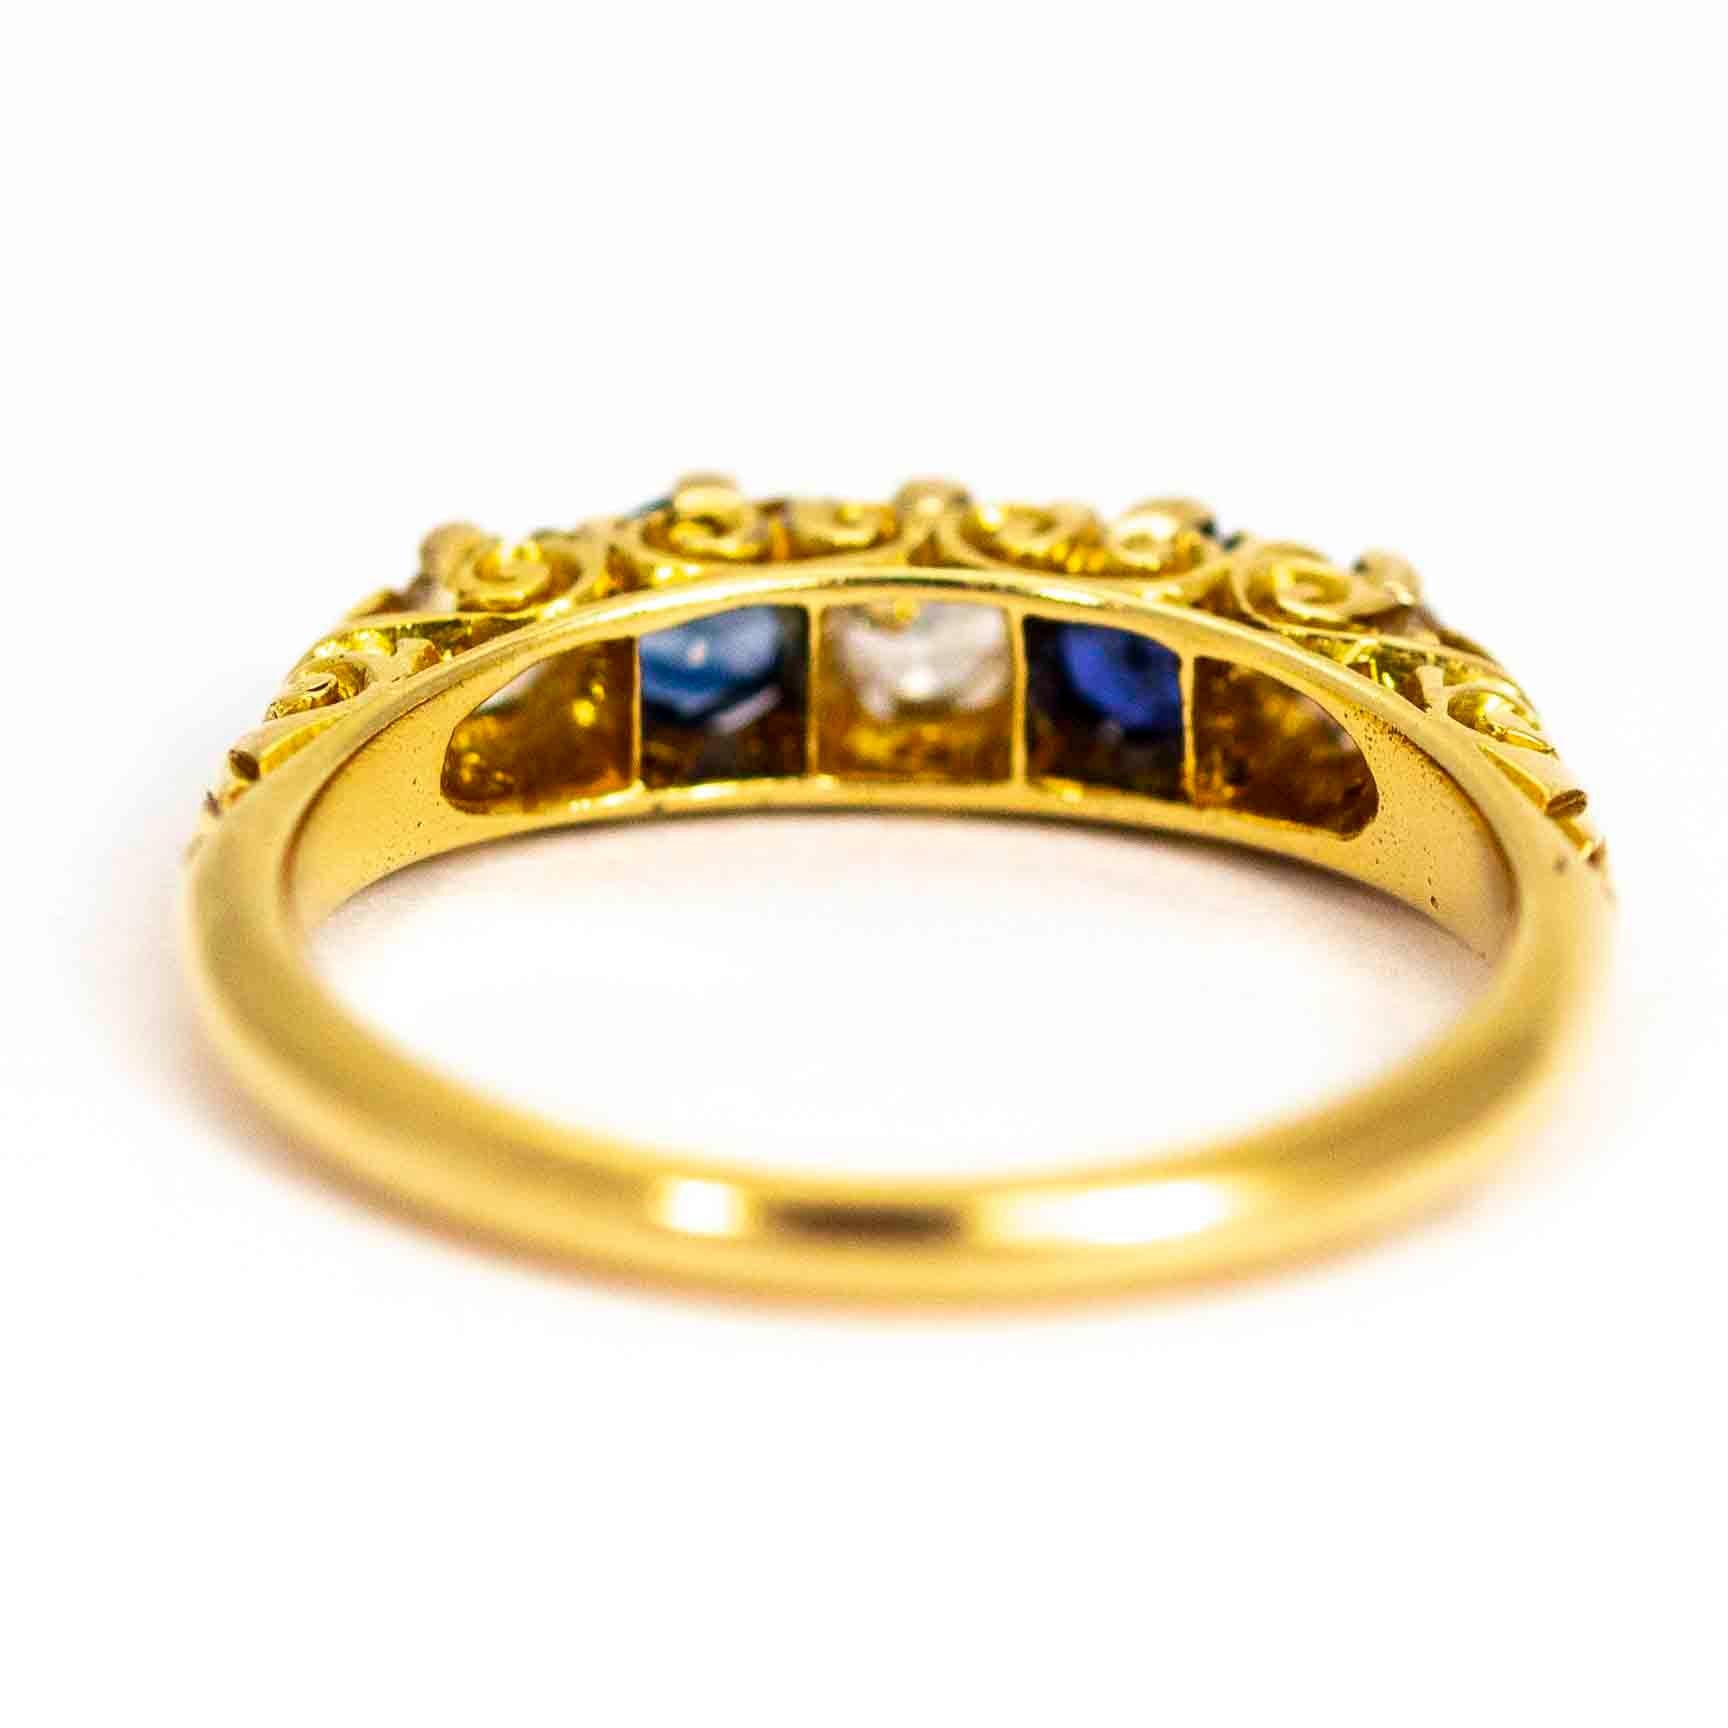 Old European Cut Victorian 18 Carat Gold Sapphire and Diamond Five-Stone Ring